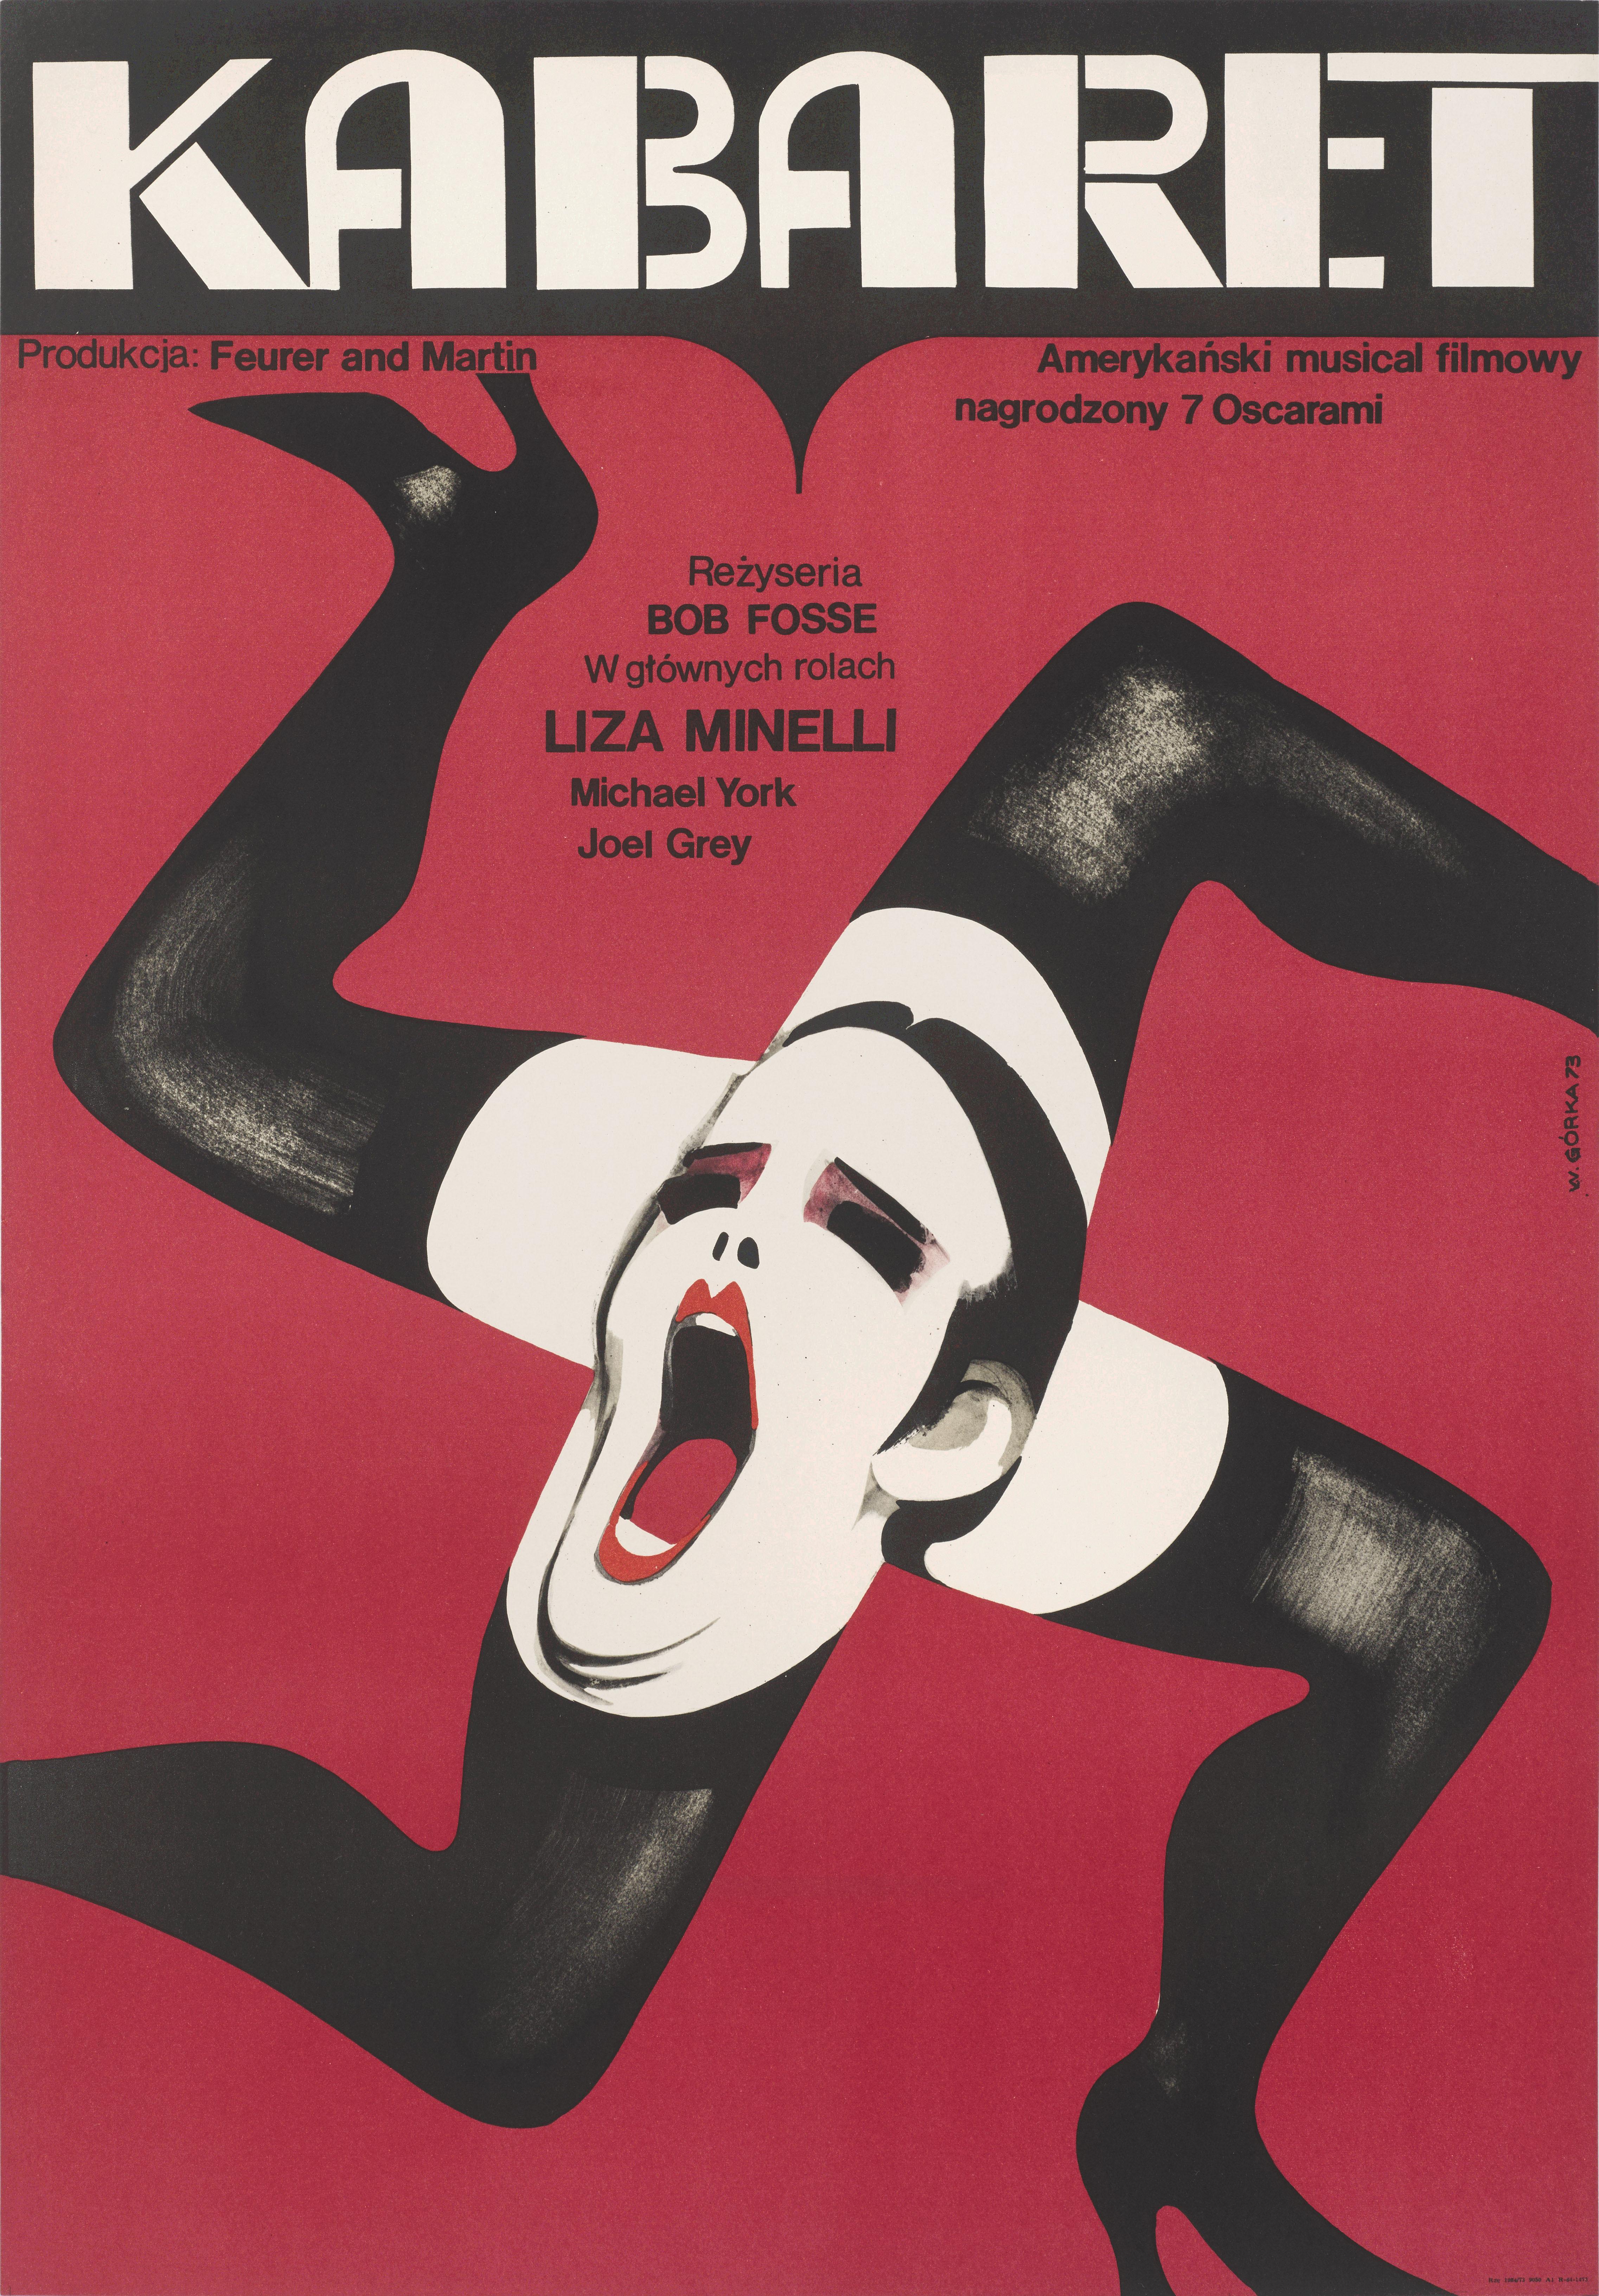 Original Polish film poster for Cabaret 1972). 
This poster was designed by Polish artist Wiktor Gorka 1922 -2004 for the films first Polish release in 1973. Gorka was co-founder of the Polish Poster School . This is a very sought after poster